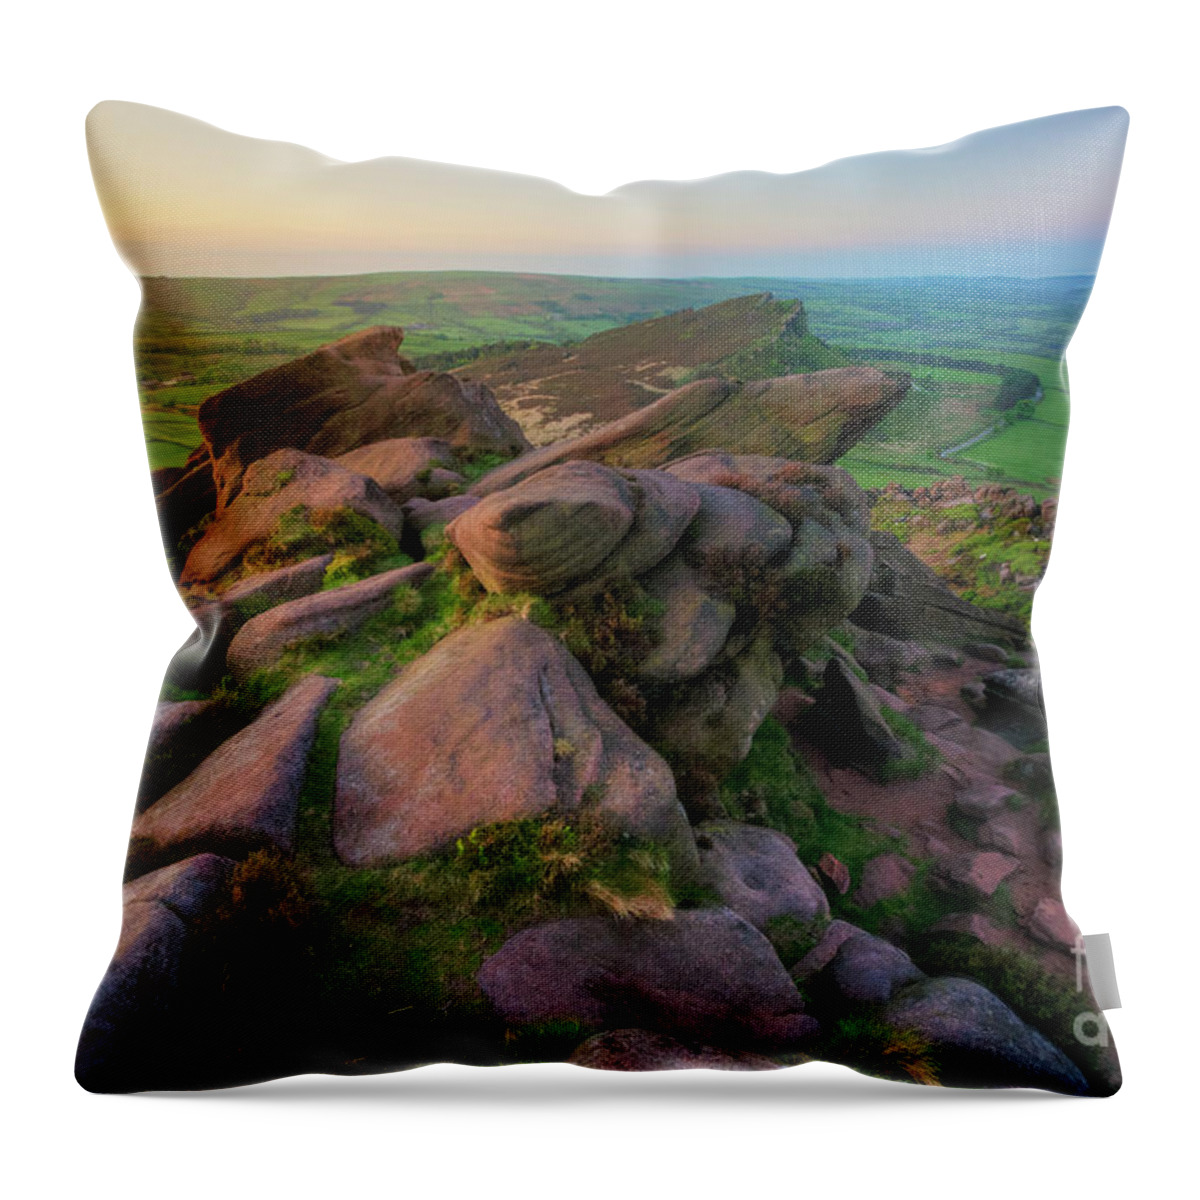 Photography Throw Pillow featuring the photograph The Roaches 4.0 by Yhun Suarez